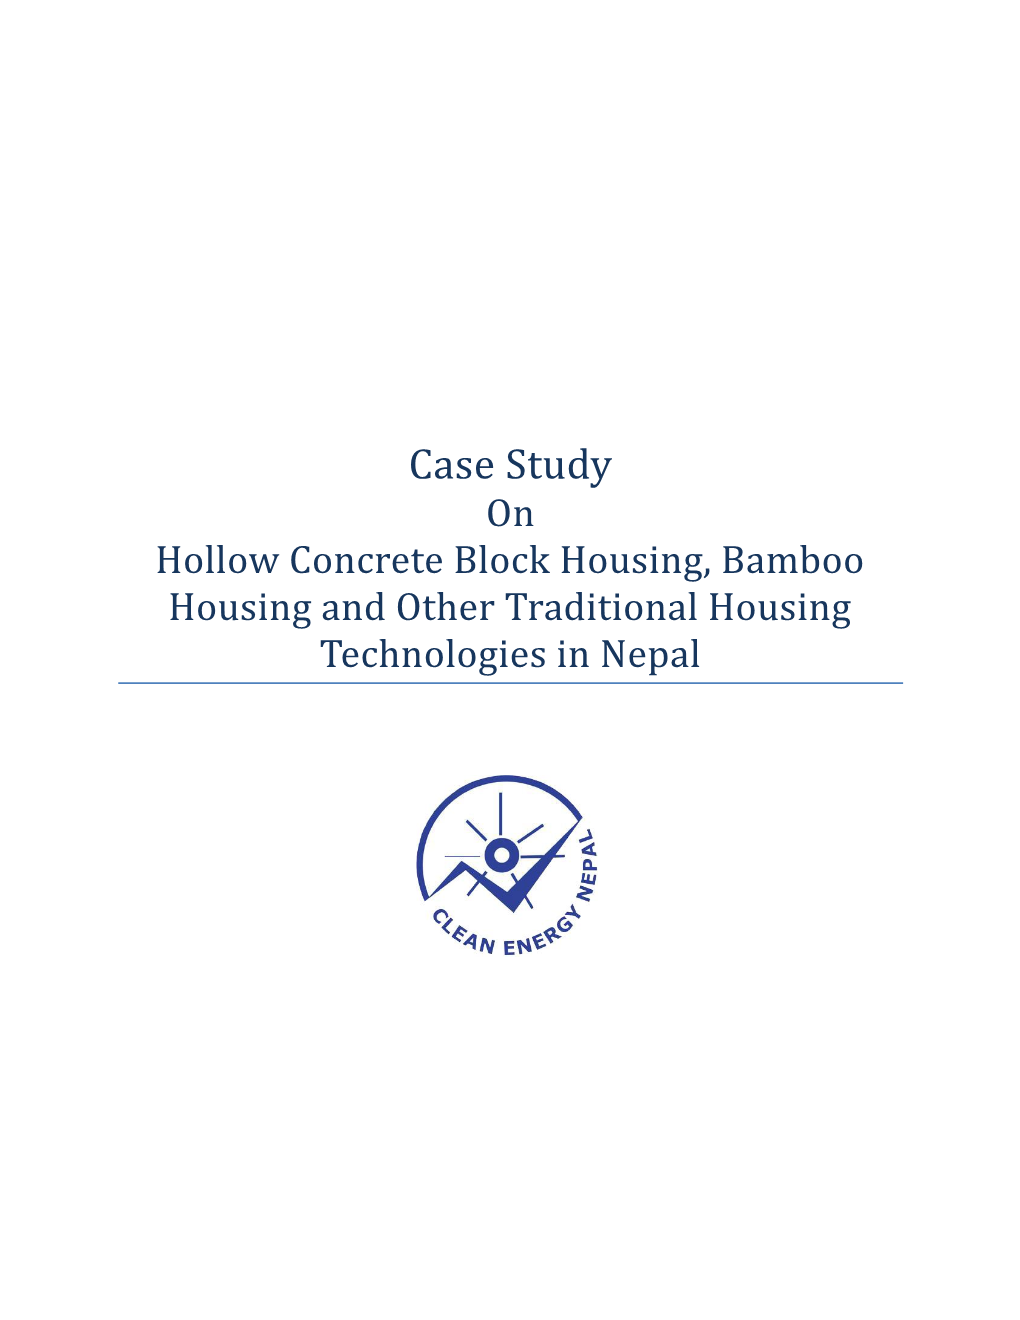 Case Study on Hollow Concrete Block Housing, Bamboo Housing and Other Traditional Housing Technologies in Nepal